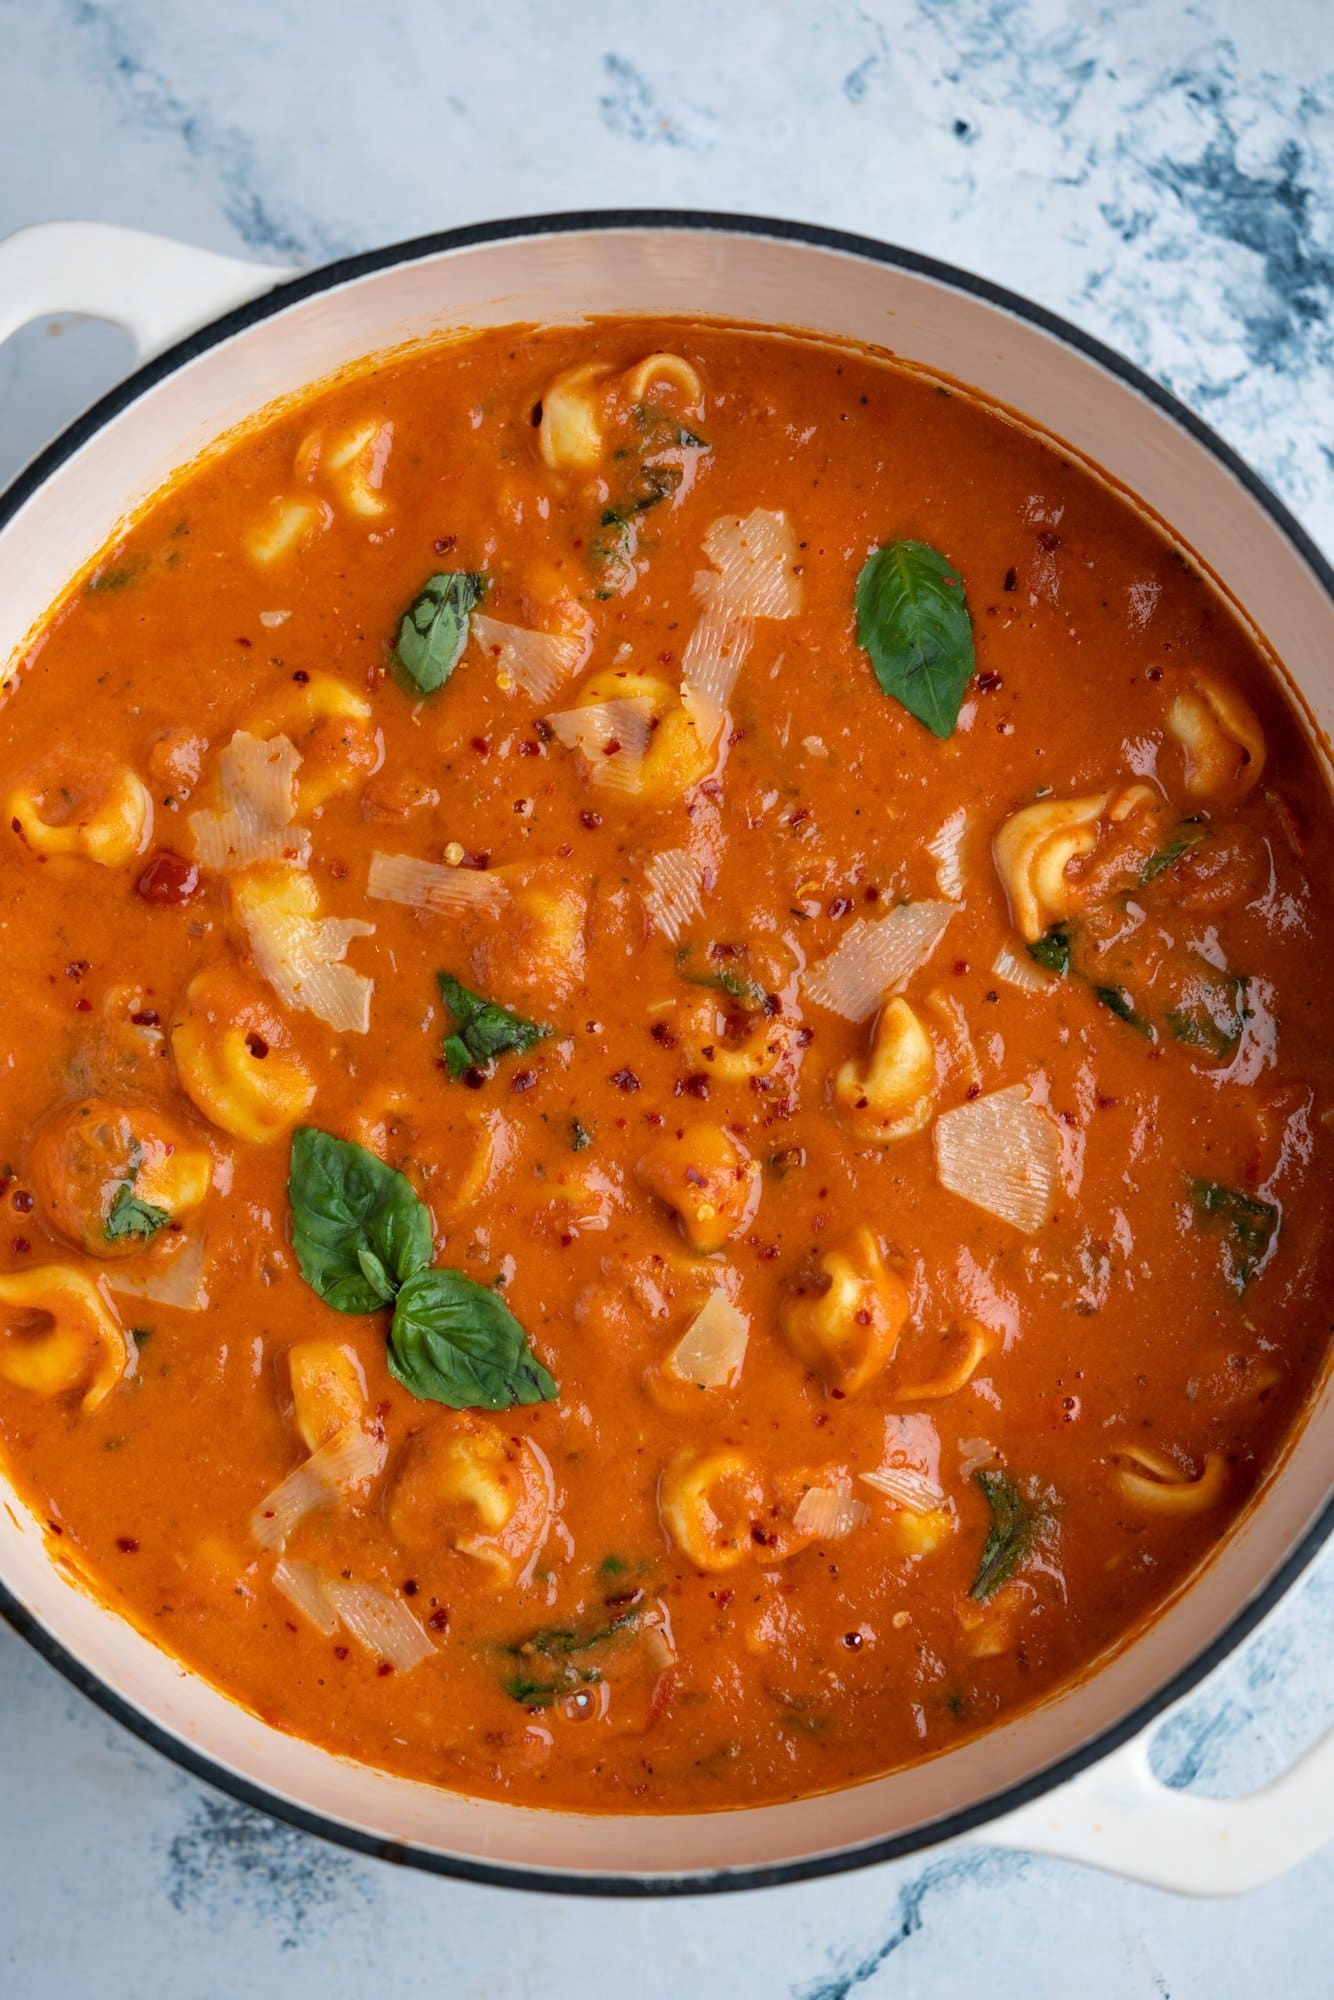 Fresh basil, parmesan cheese garnished on tomato tortellini soup which tastes creamy, cheesy and tangy.